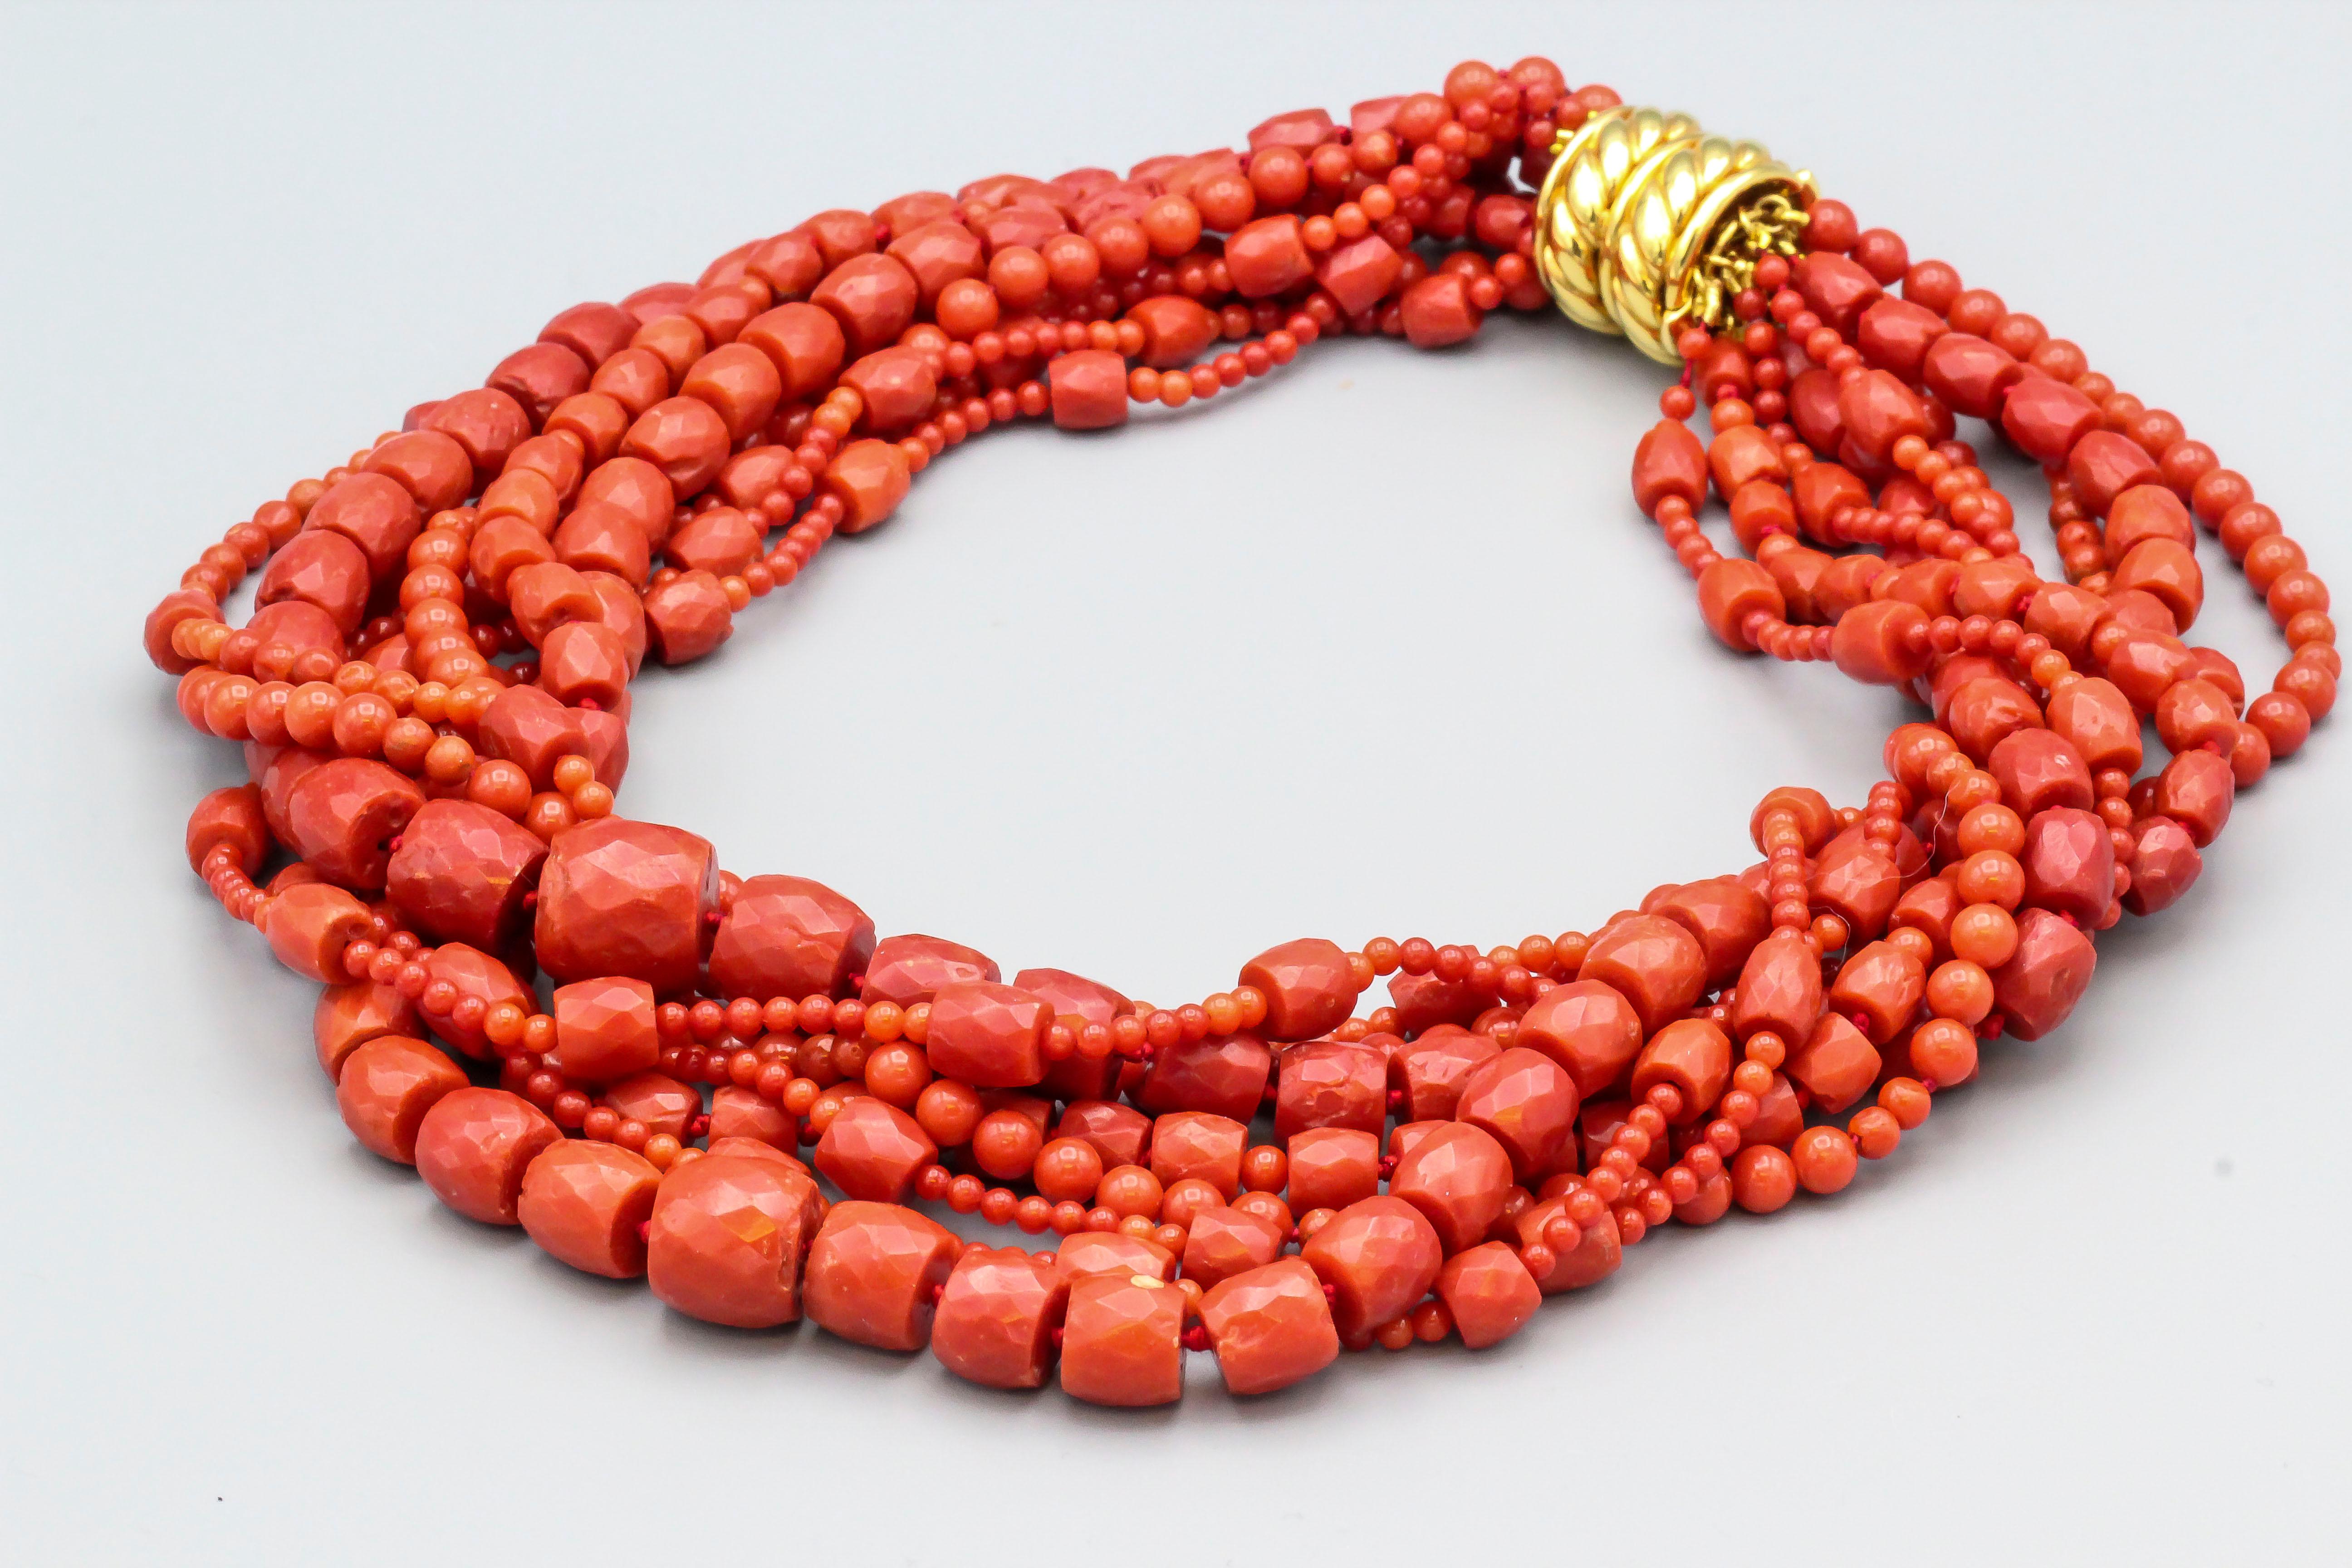 Fine coral and 18K yellow gold torsade necklace by Verdura circa 1970-80s. It features 9 strands of rich red coral beads, held on by an 18K yellow gold clasp. Strands are of varying sizes and diameters, ranging from 3mm to 14mm. Approx. 18